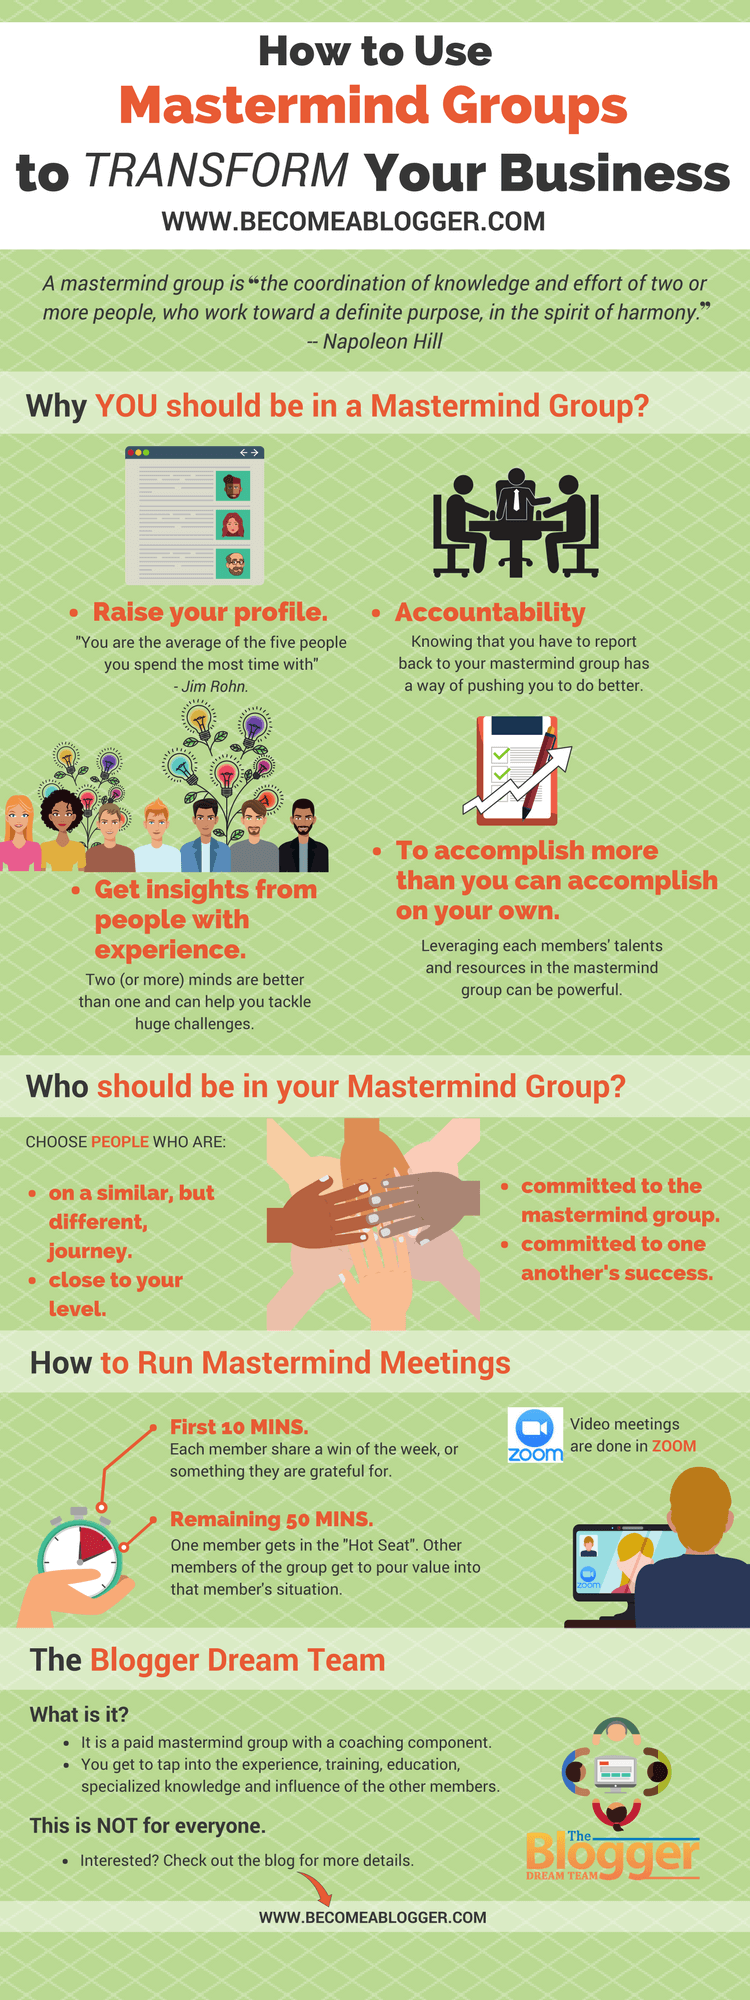 Mastermind Groups for Your Business